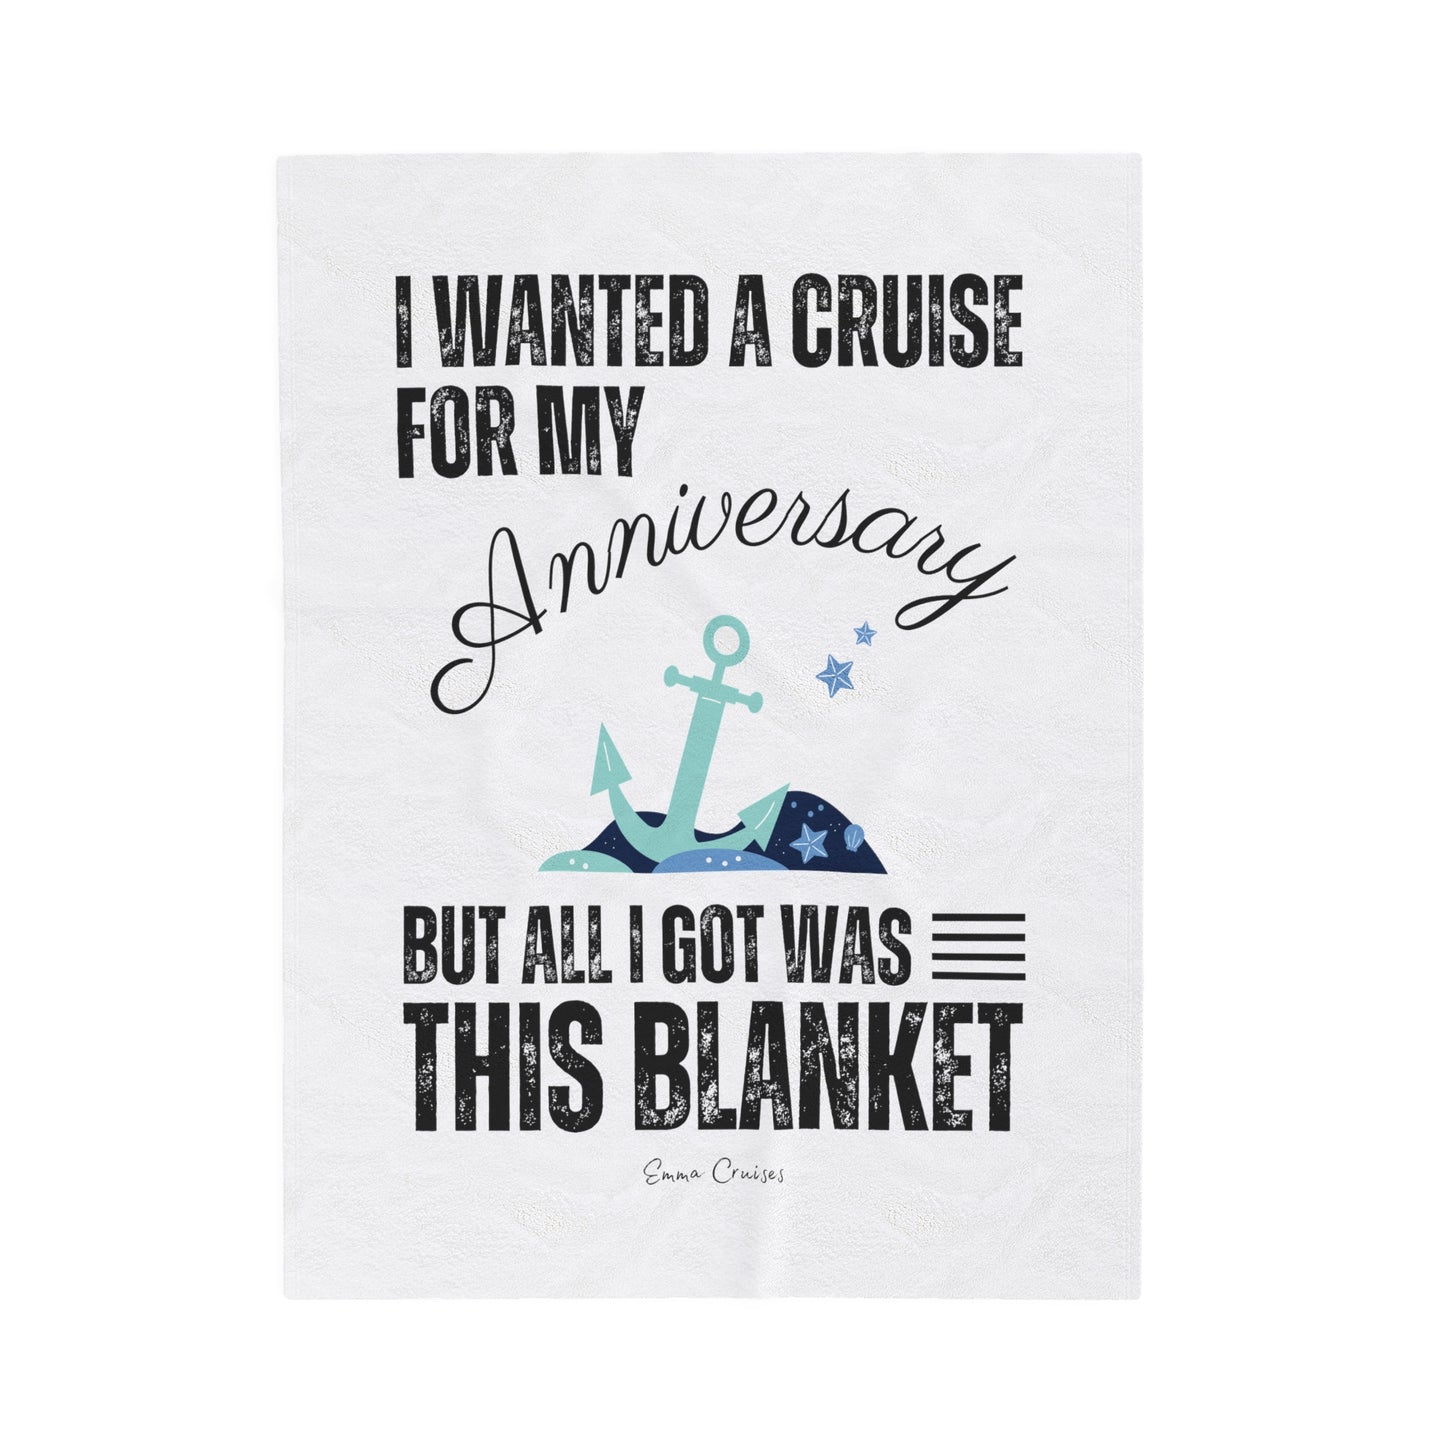 I Wanted a Cruise for My Anniversary - Velveteen Plush Blanket